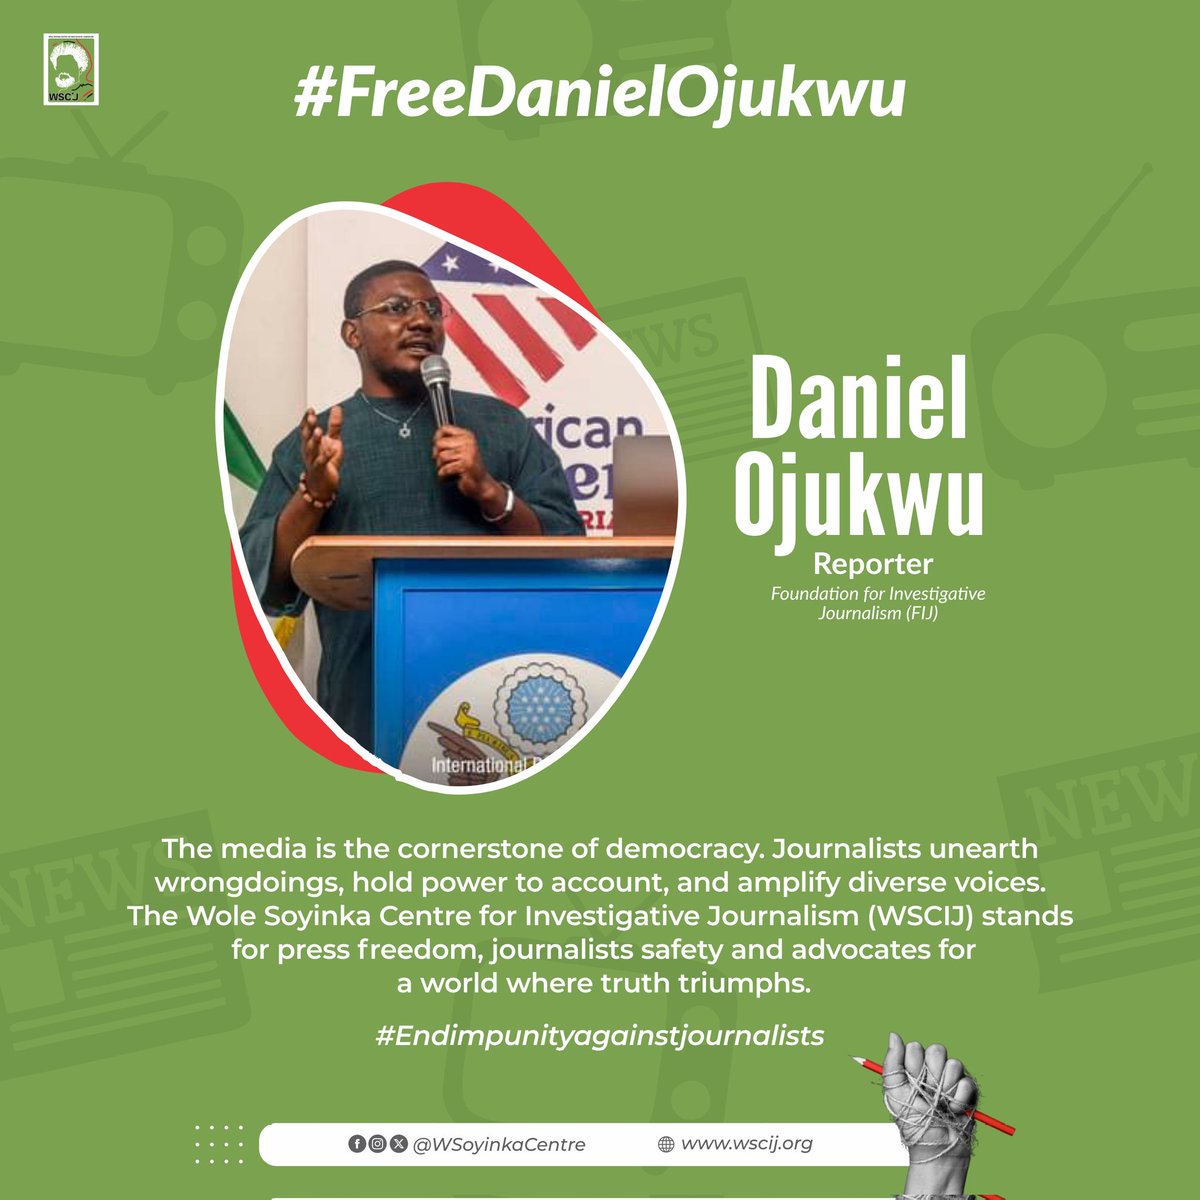 Journalism is not a crime. Today makes it day 8 that @Mazi_OJD of @fijnigeria. His continued incarceration is worrisome. The impunity against journalists must stop. #FreeDanielOjukwuNow #FreeDanielOjukwu #EndImpunityAgainstJournalists @BenHundeyin @PoliceNG @OfficialDSSNG